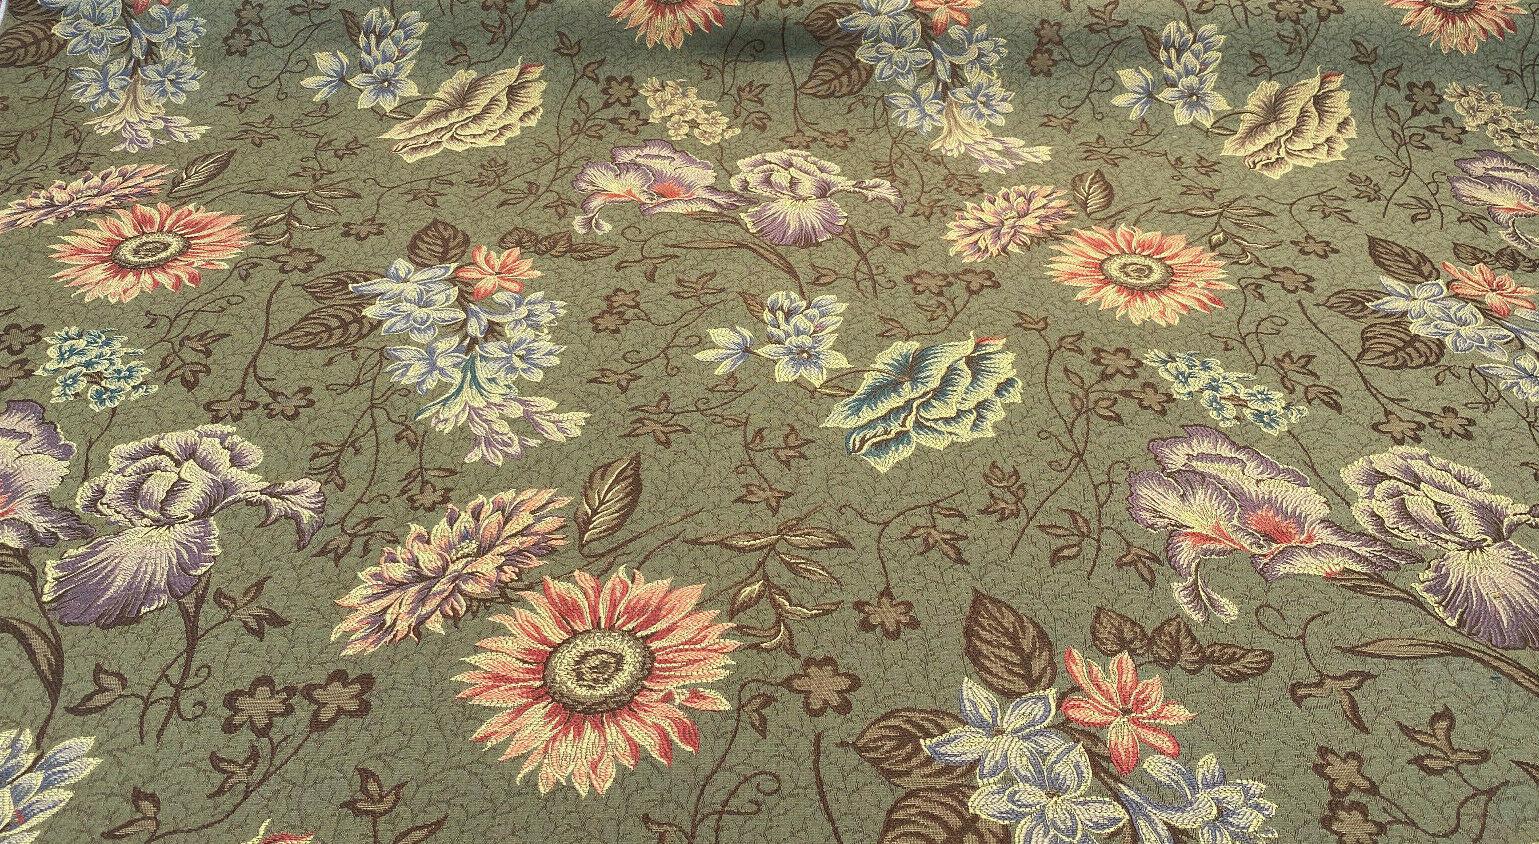 Floral Jacquard Satin Fabric Gold by the Yard